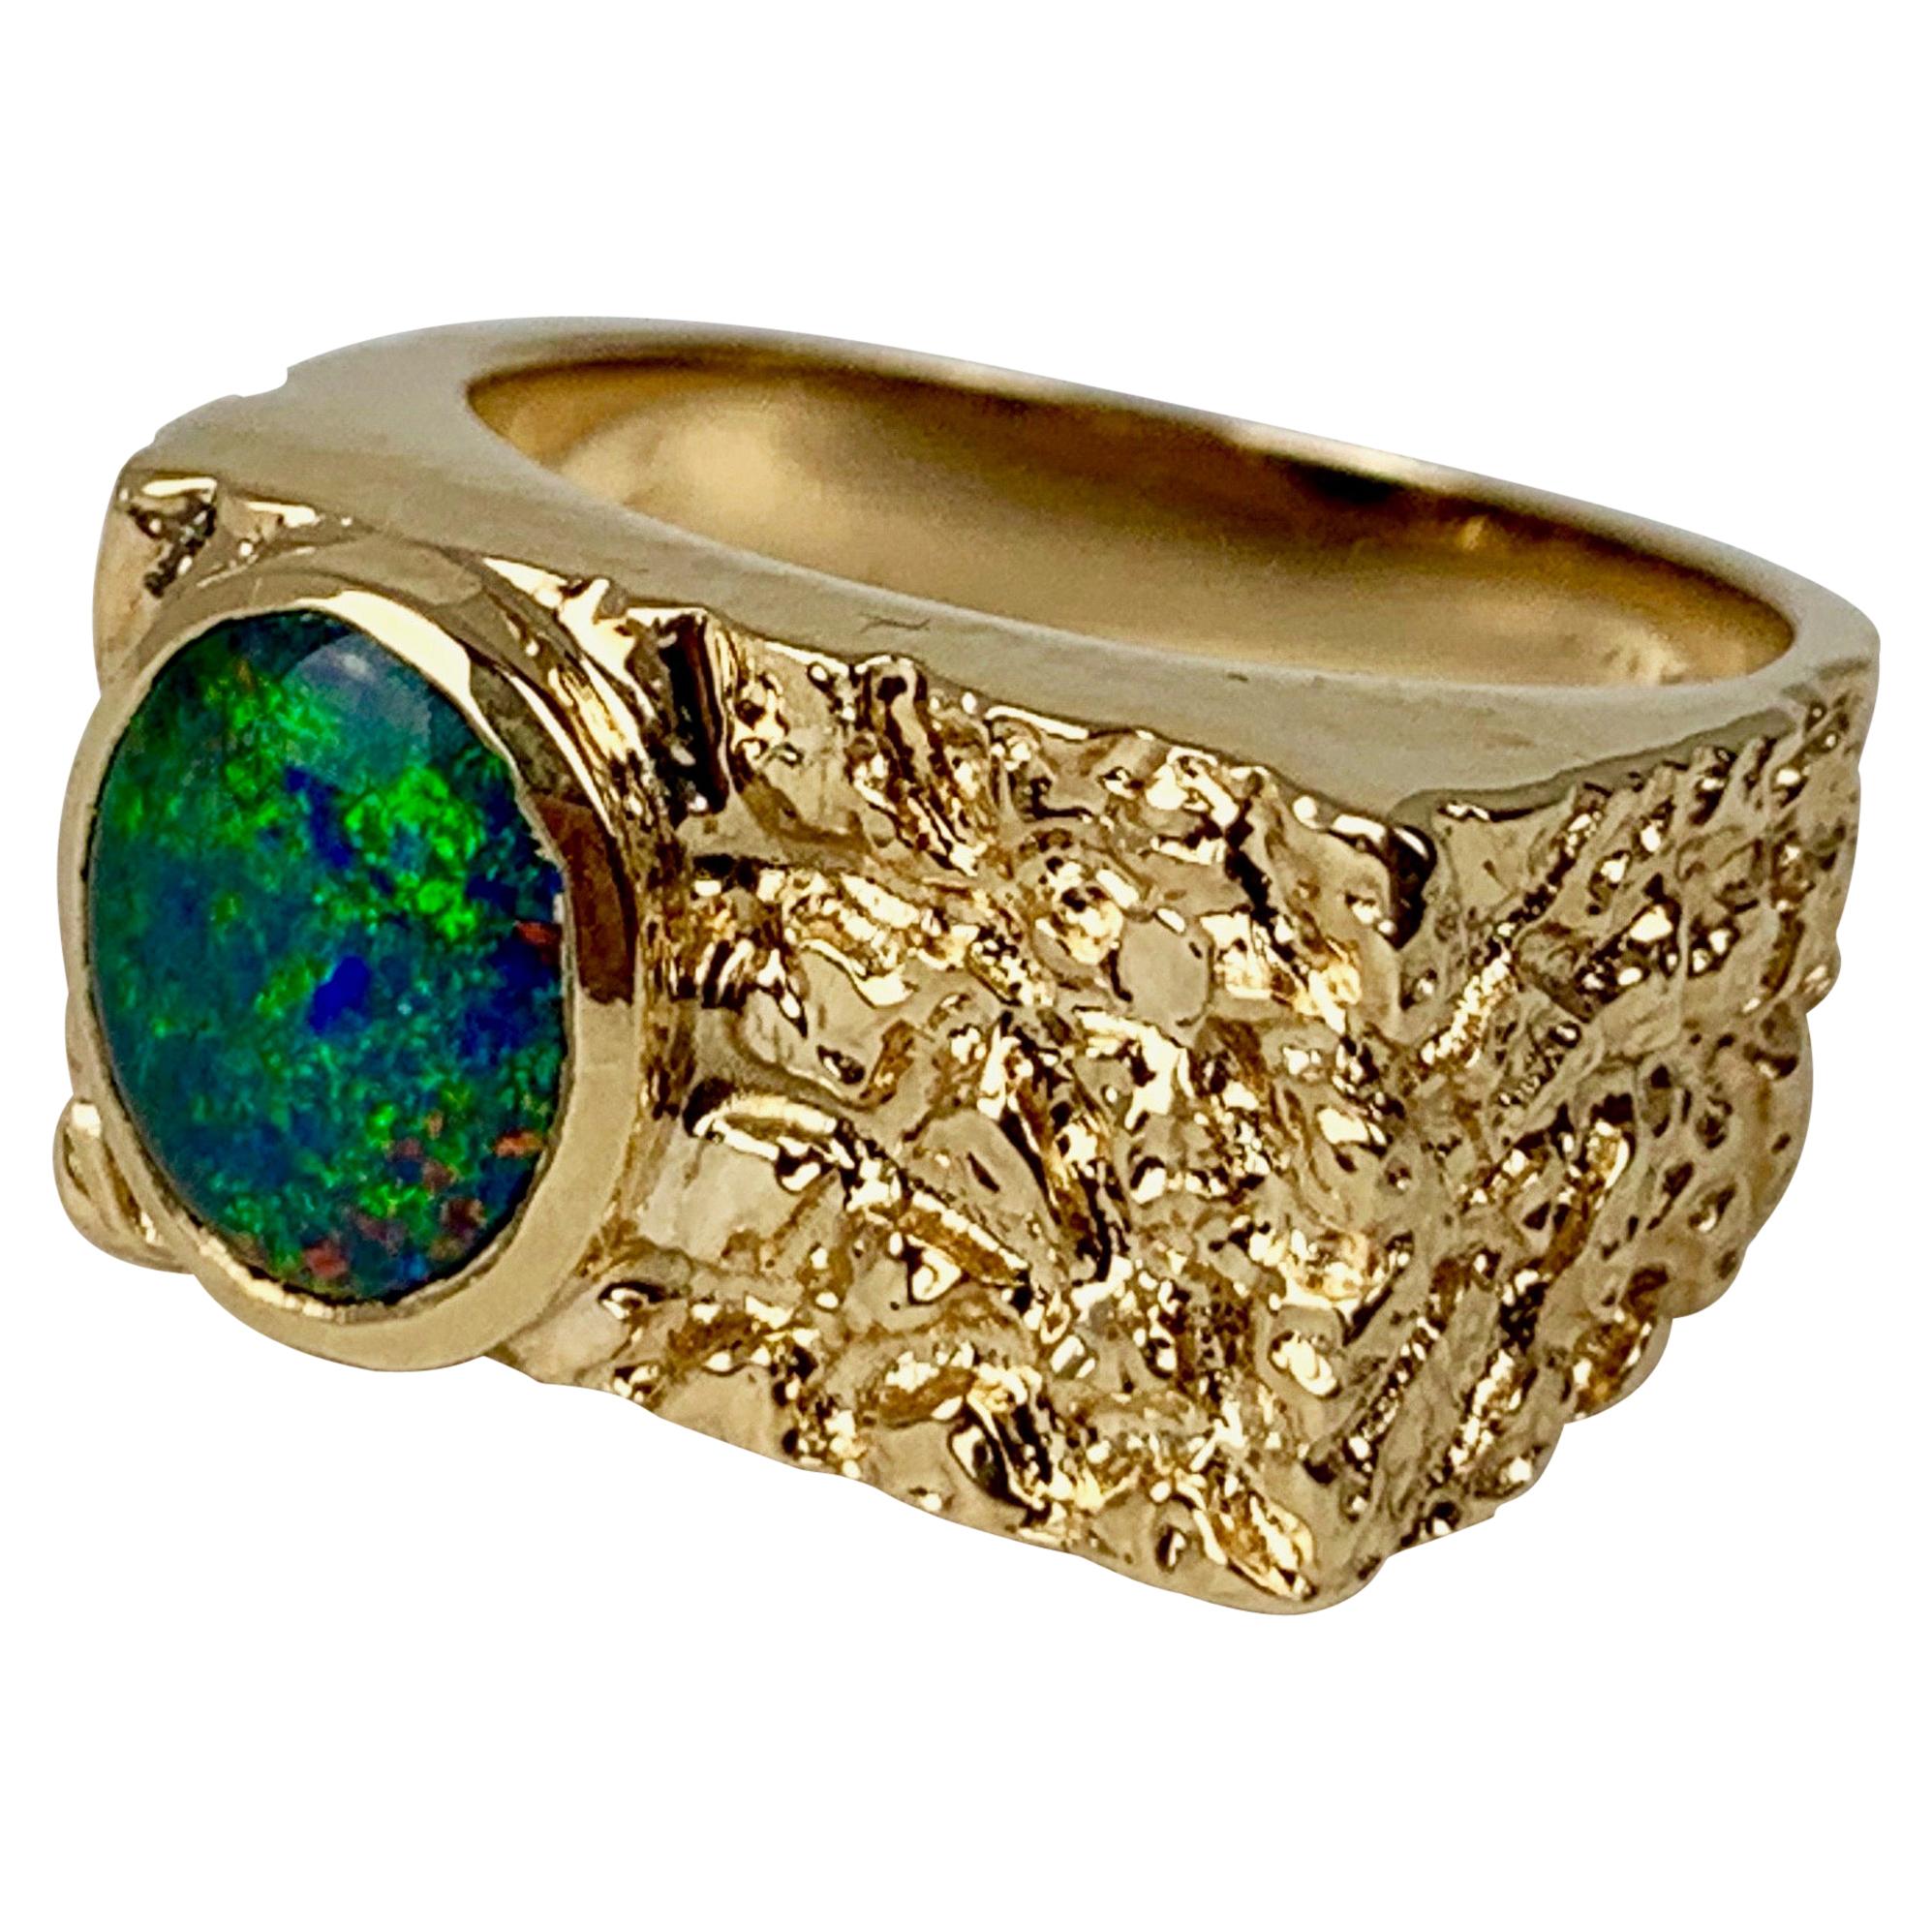  Bark Finish  Vintage Ring with a Doublet Opal set in 14k Yellow Gold-1970's